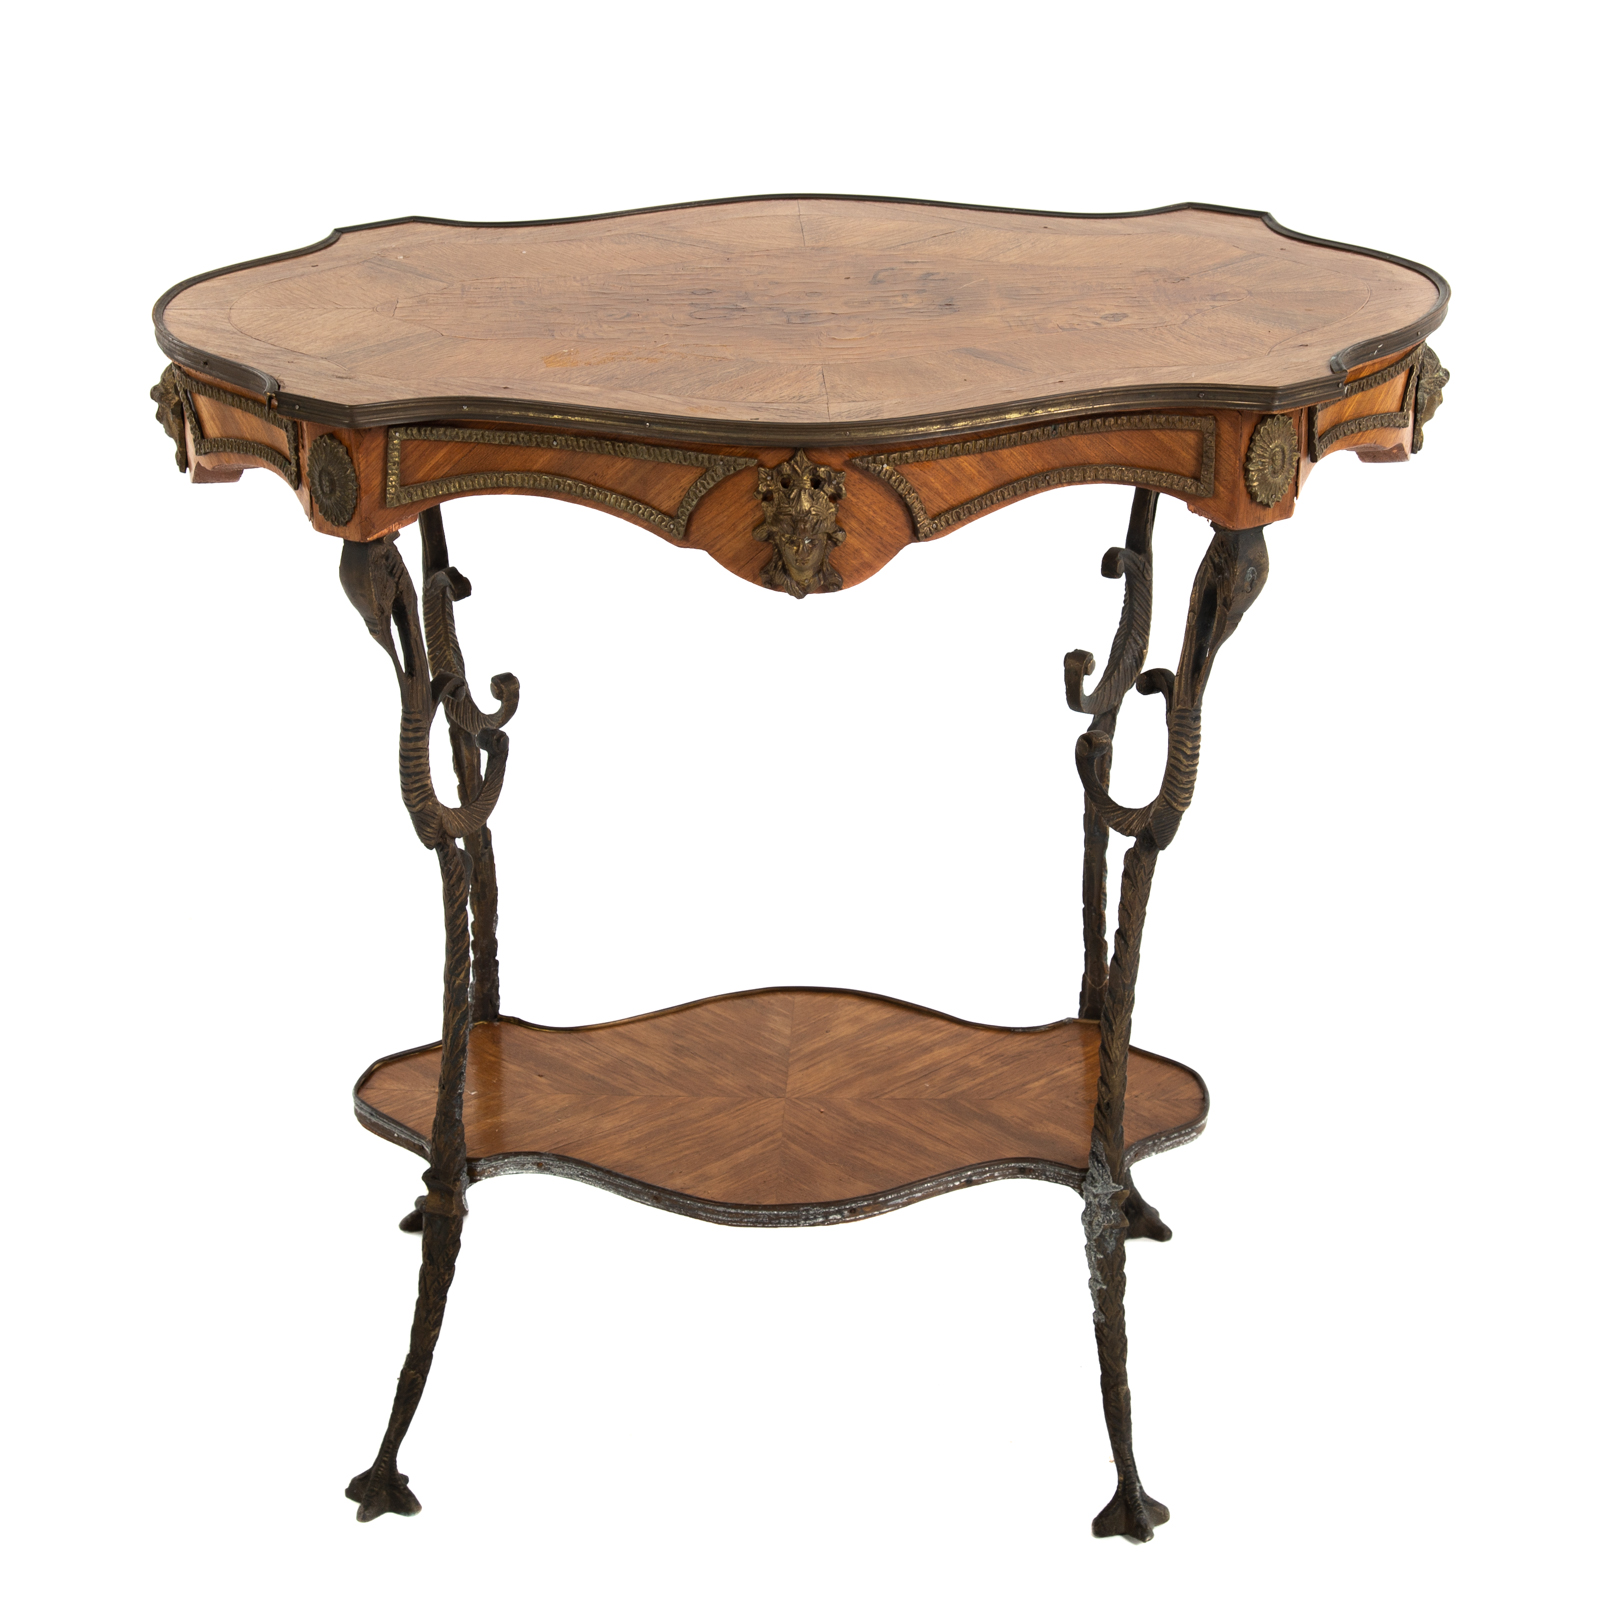 FRENCH GILT MOUNTED TABLE 20th 3cae1c